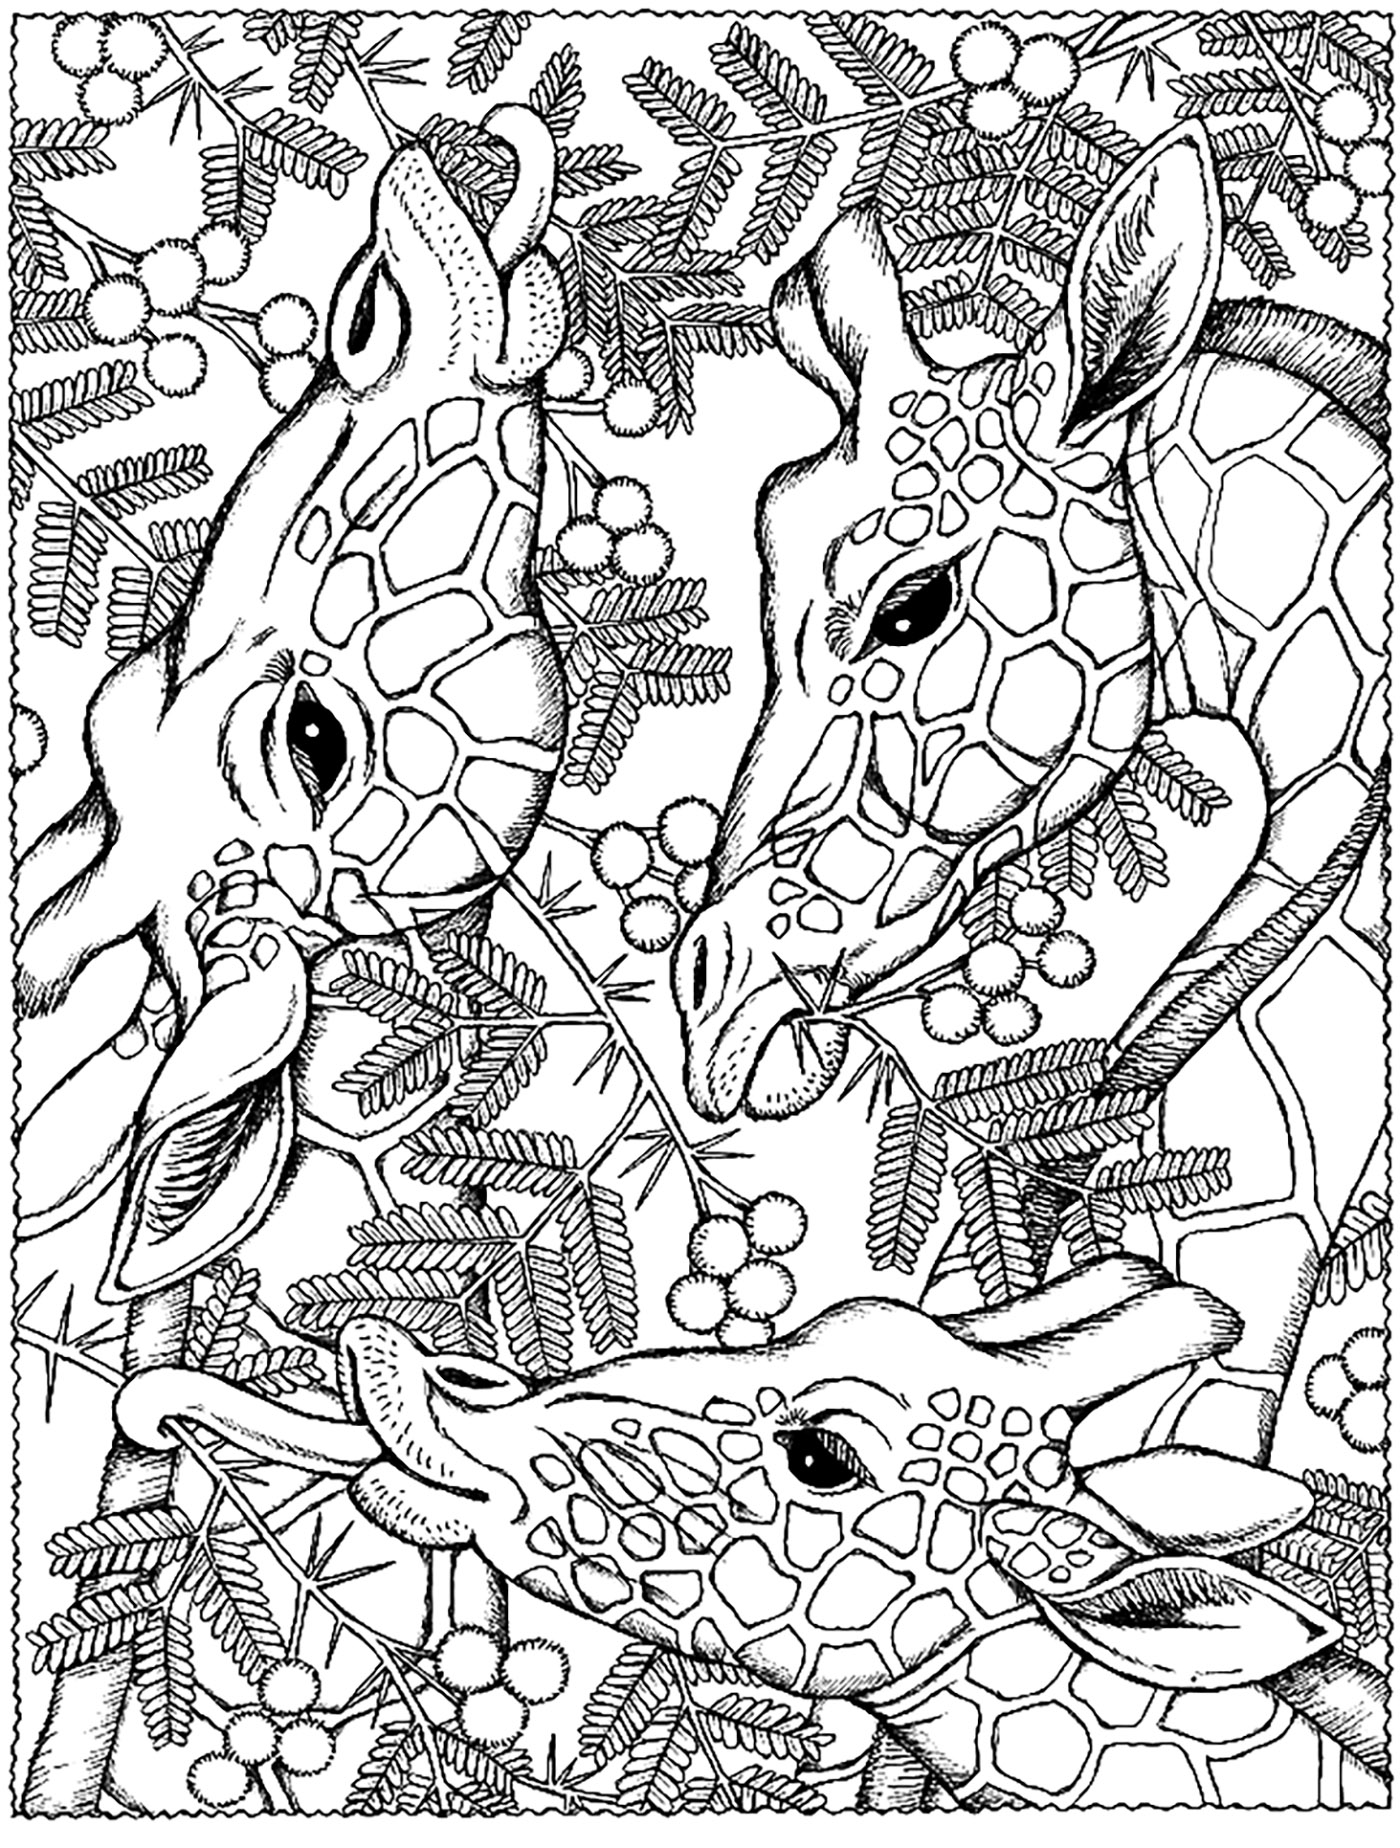 Beautiful Giraffes coloring page to print and color